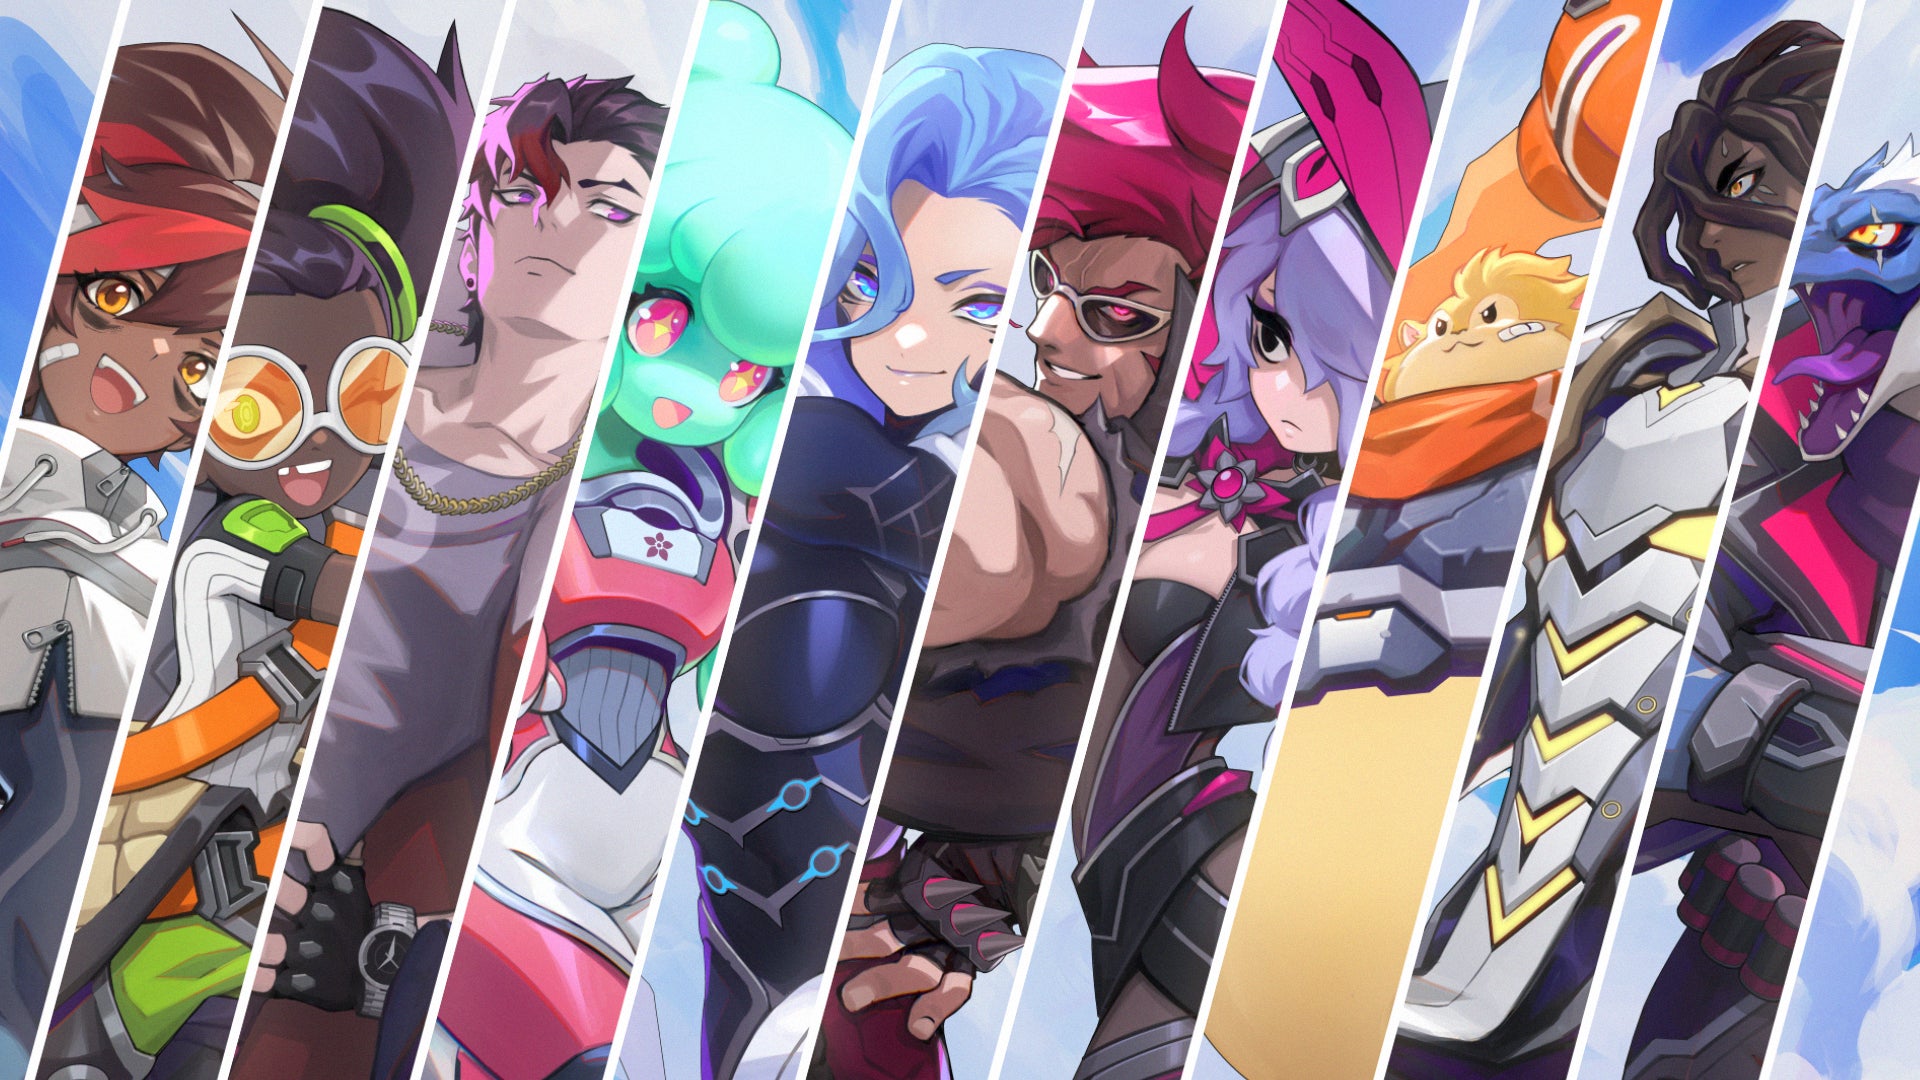 Official key art of all the characters in Omega Strikers